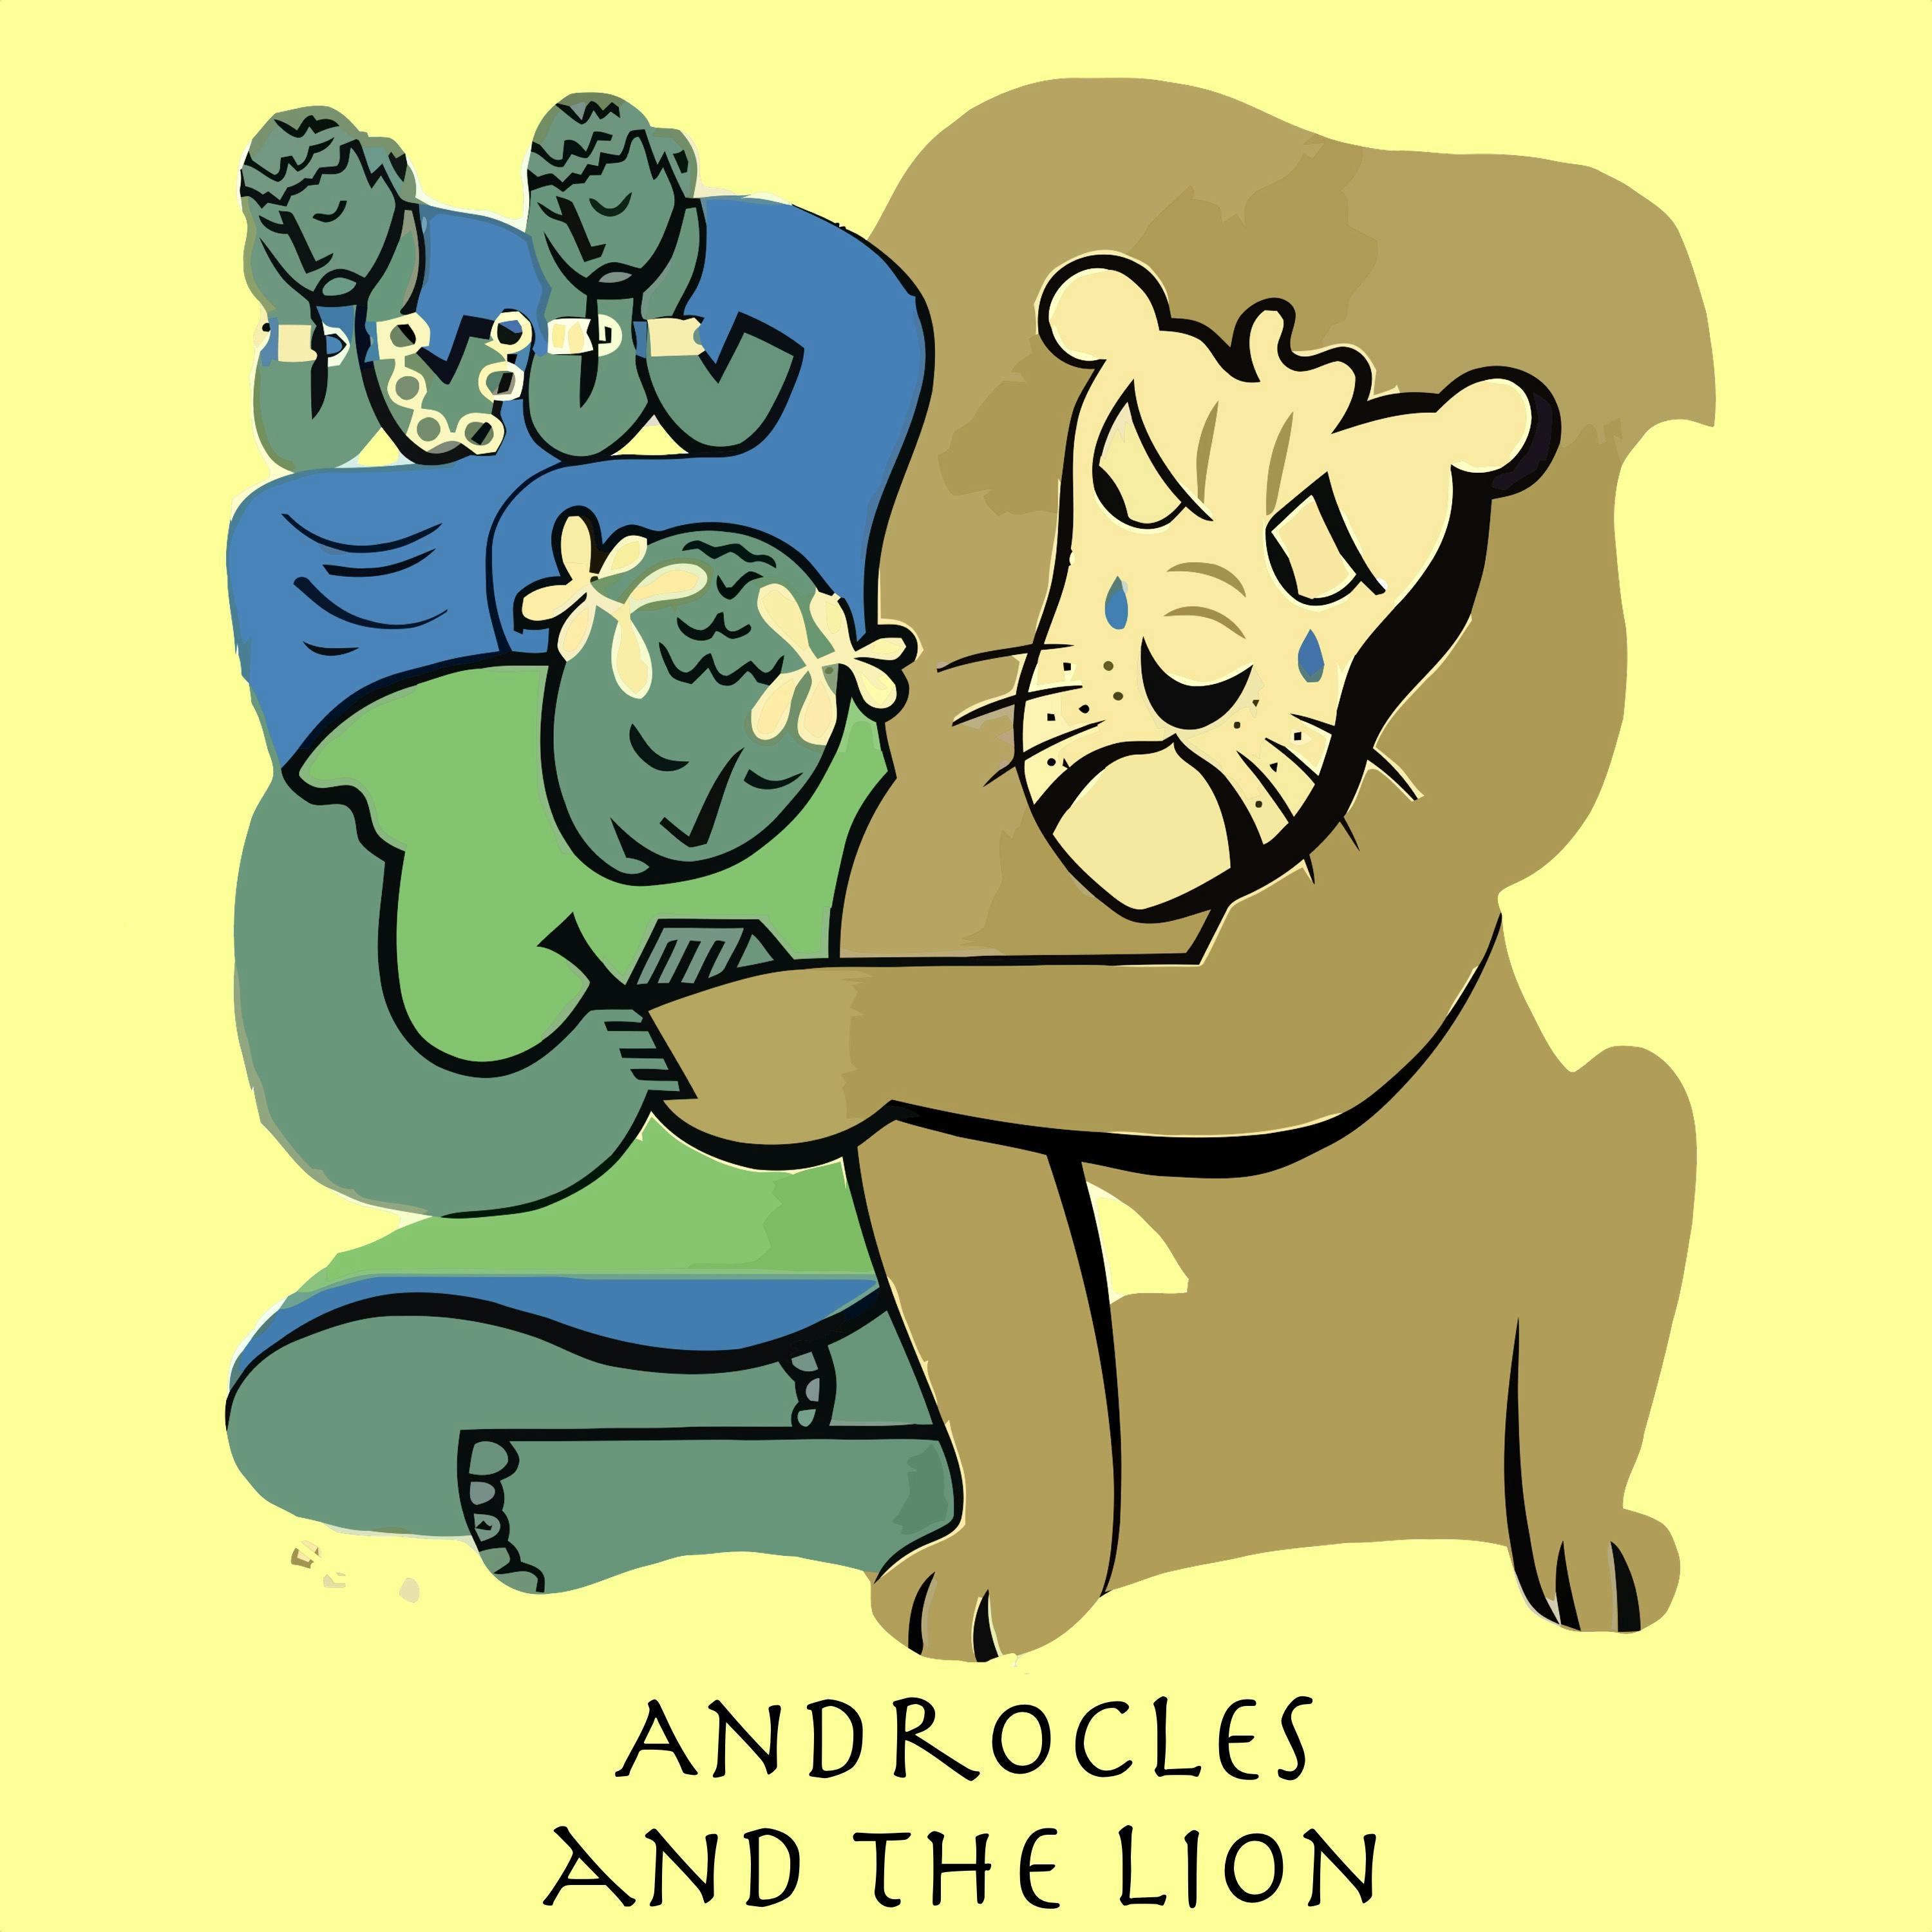 Androcles and the Lion - undefined